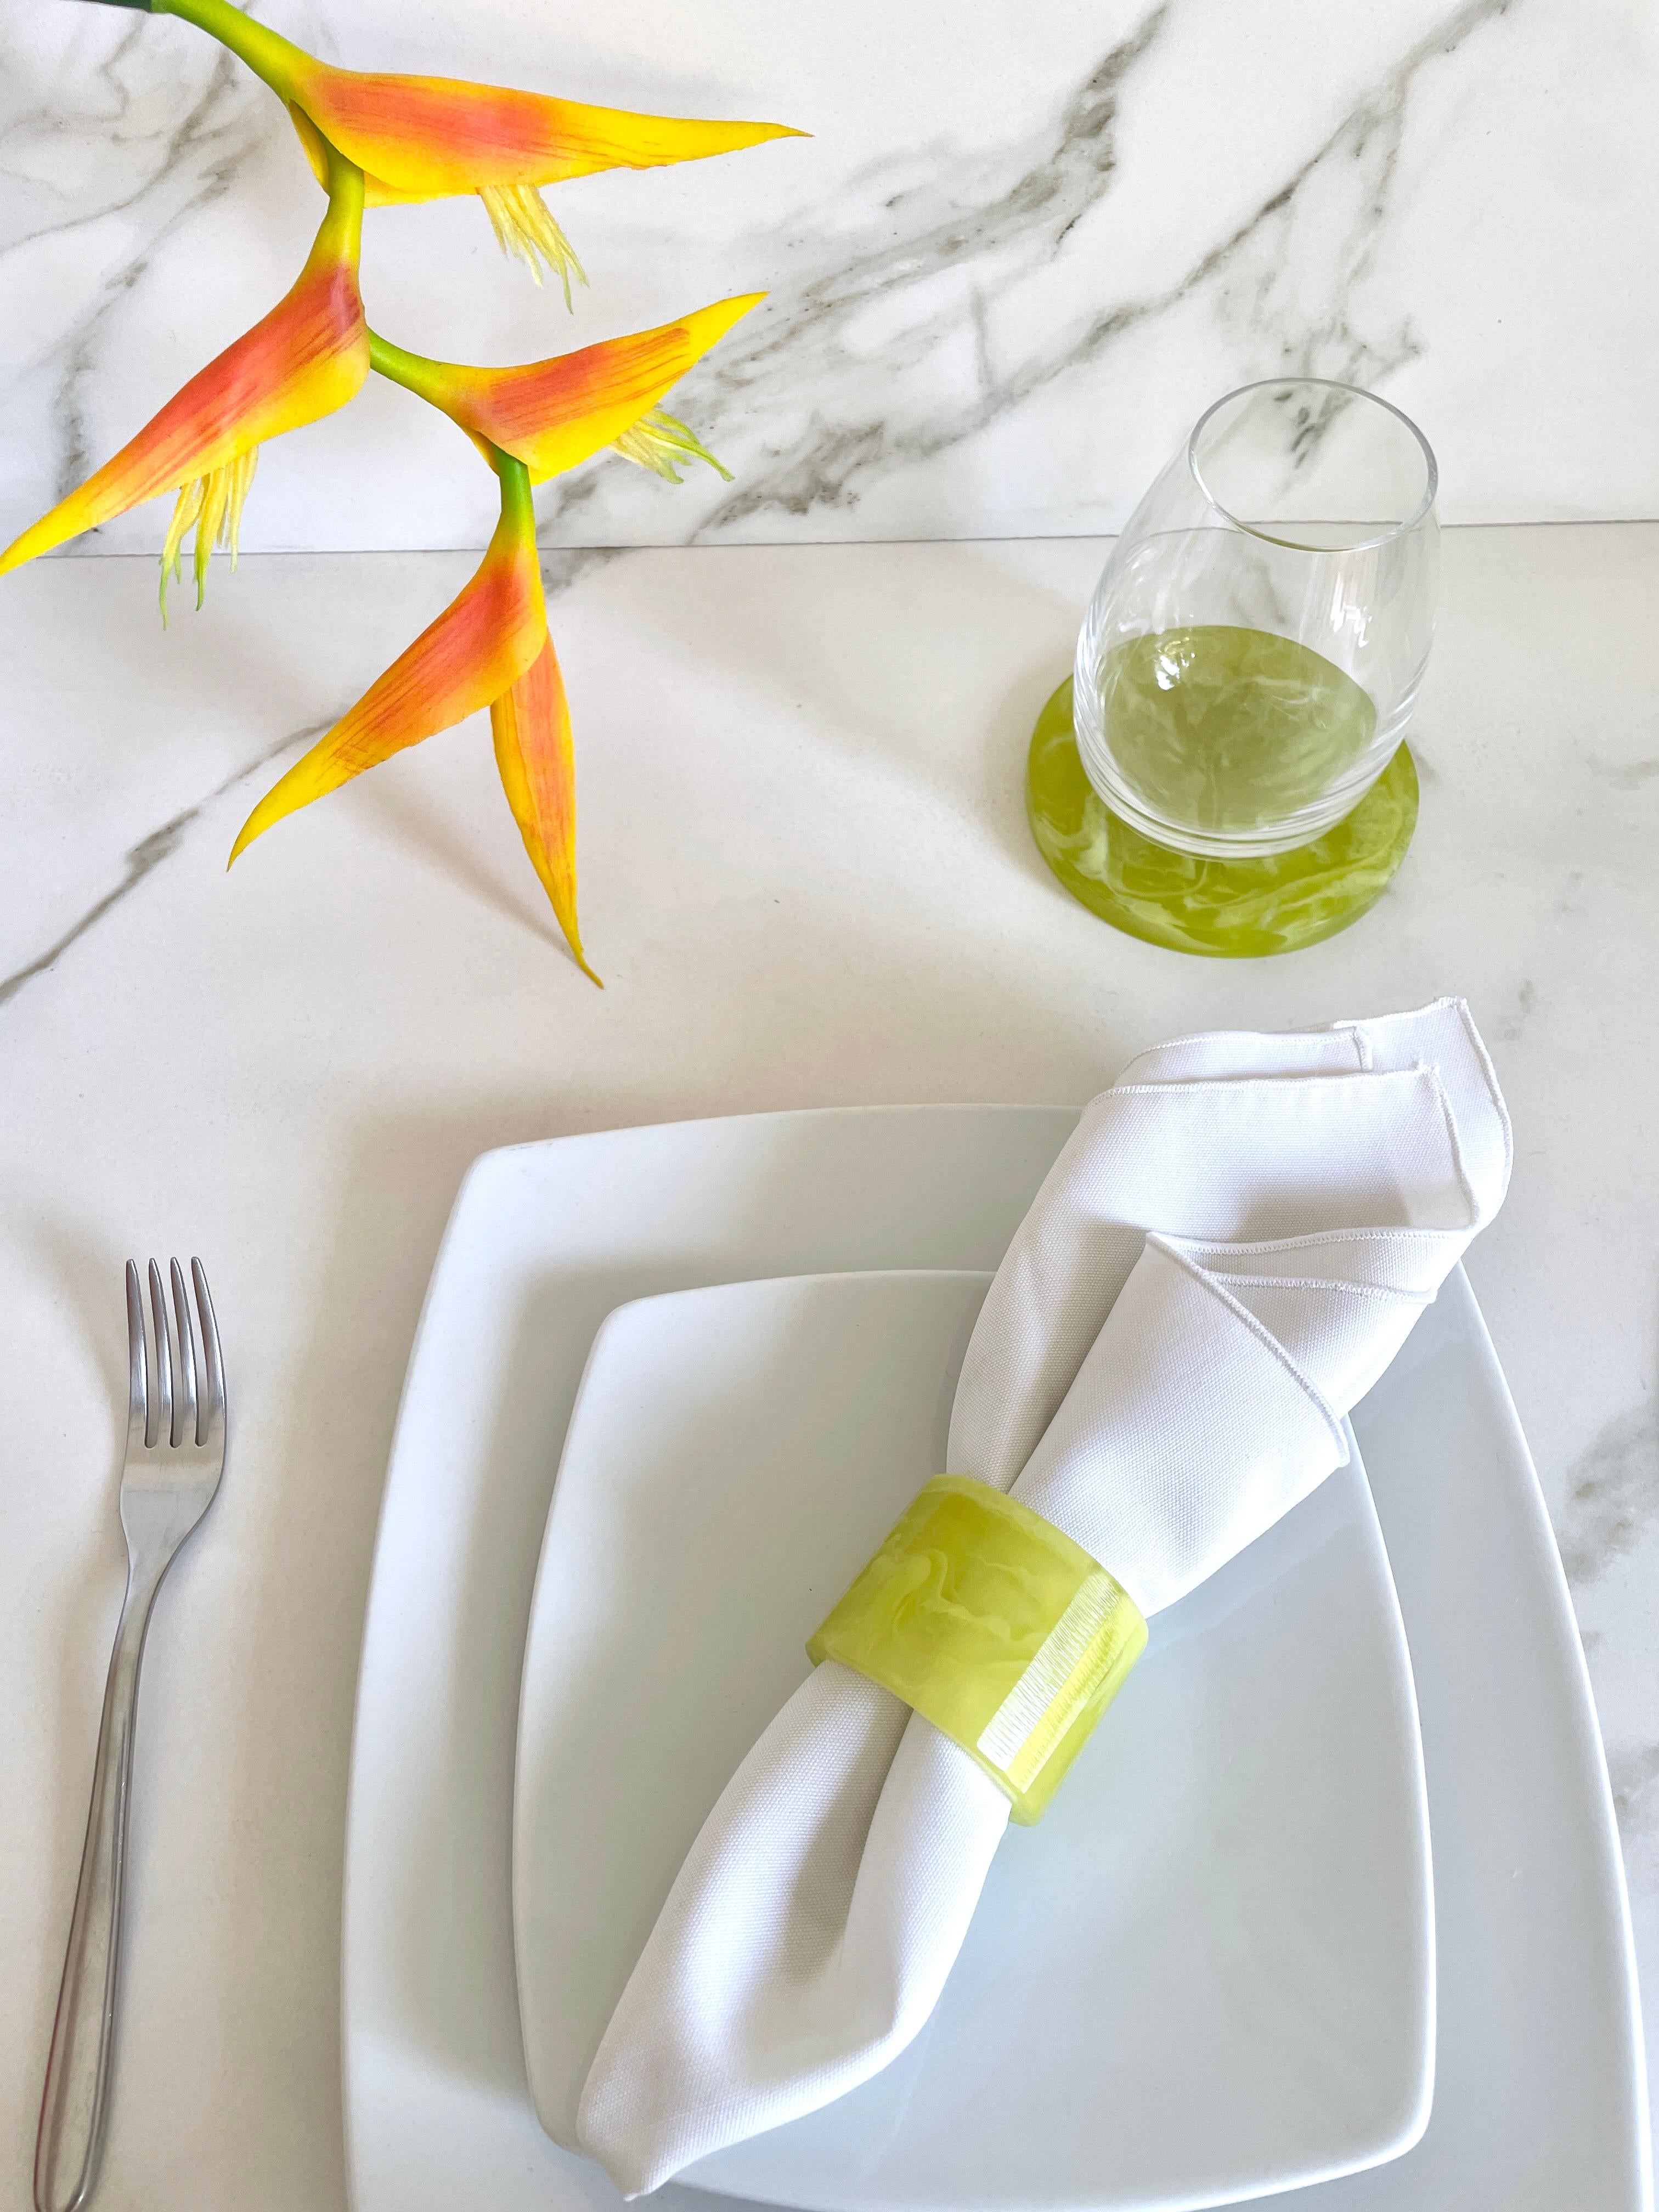 Our colourful, modern and playful resin napkin rings will be the perfect addition to your spring and summer tablescape. 
The set includes 4 napkin rings.

Designed by Paola Valle and manufactured in Mexico City by extraordinary artisans. Our goal